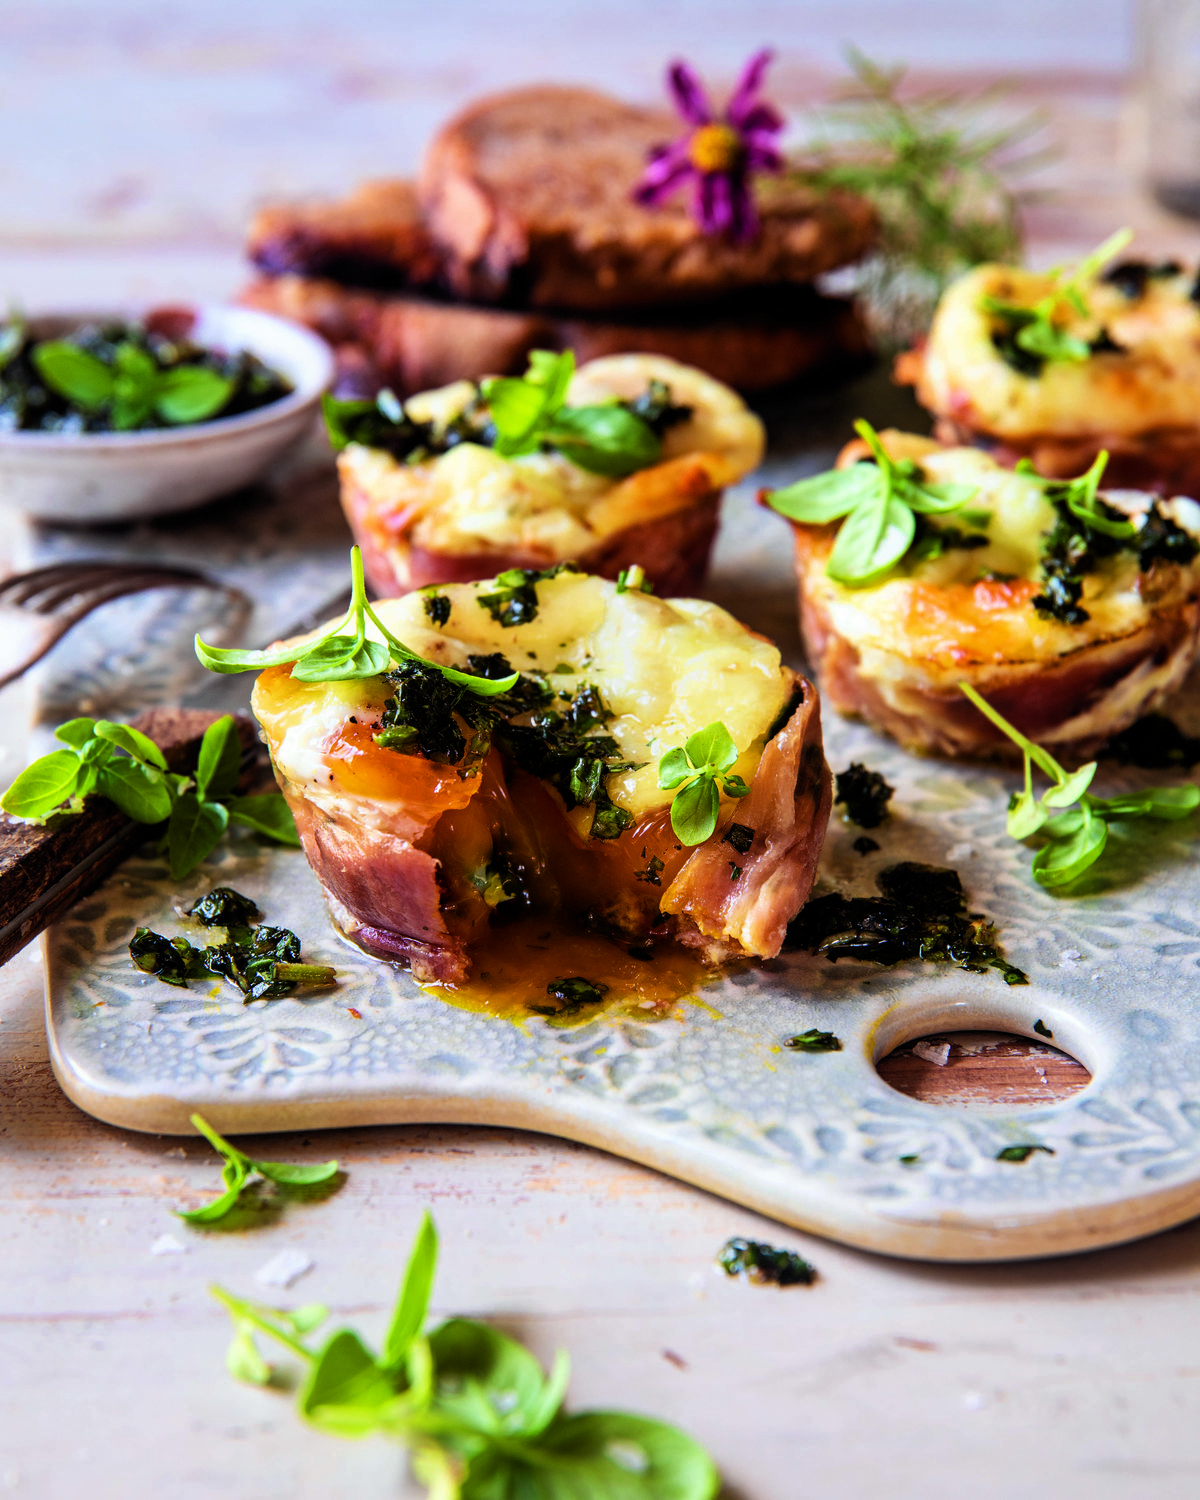 tieghan gerard prosciutto breakfast cups on tray with micro greens